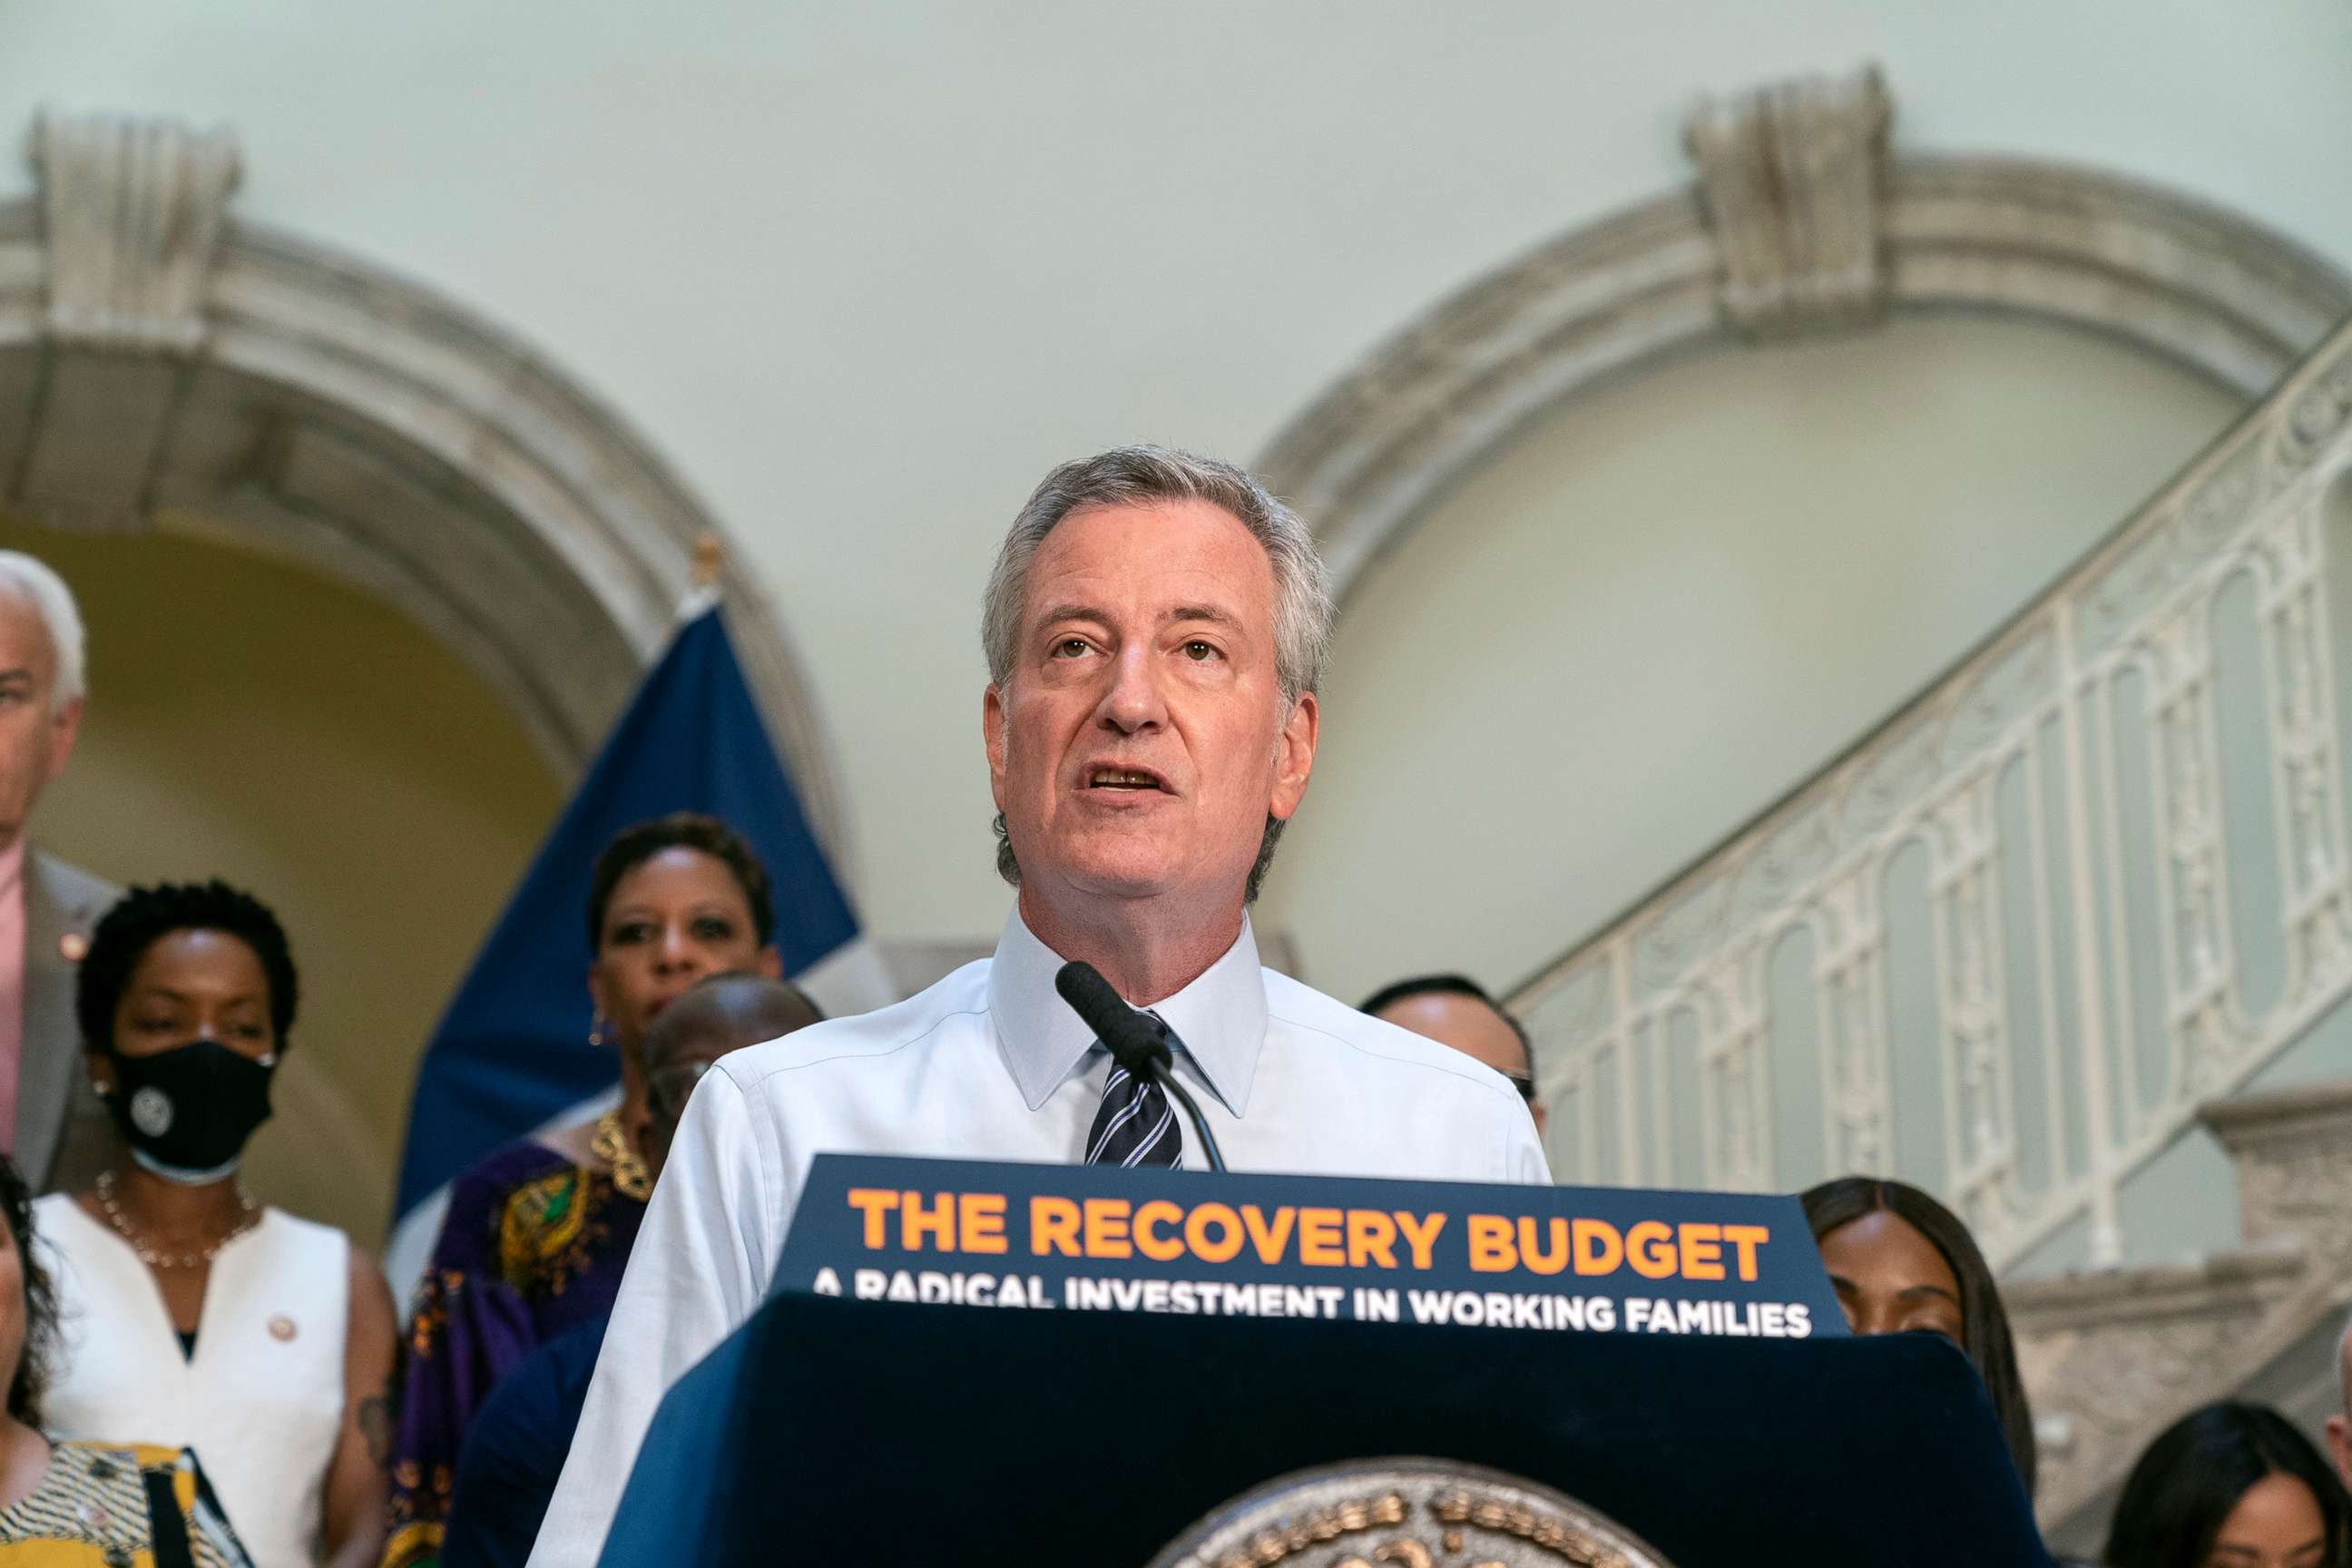 PHOTO: Mayor Bill de Blasio speaks at a joint press conference, June 30, 2021, in New York City.